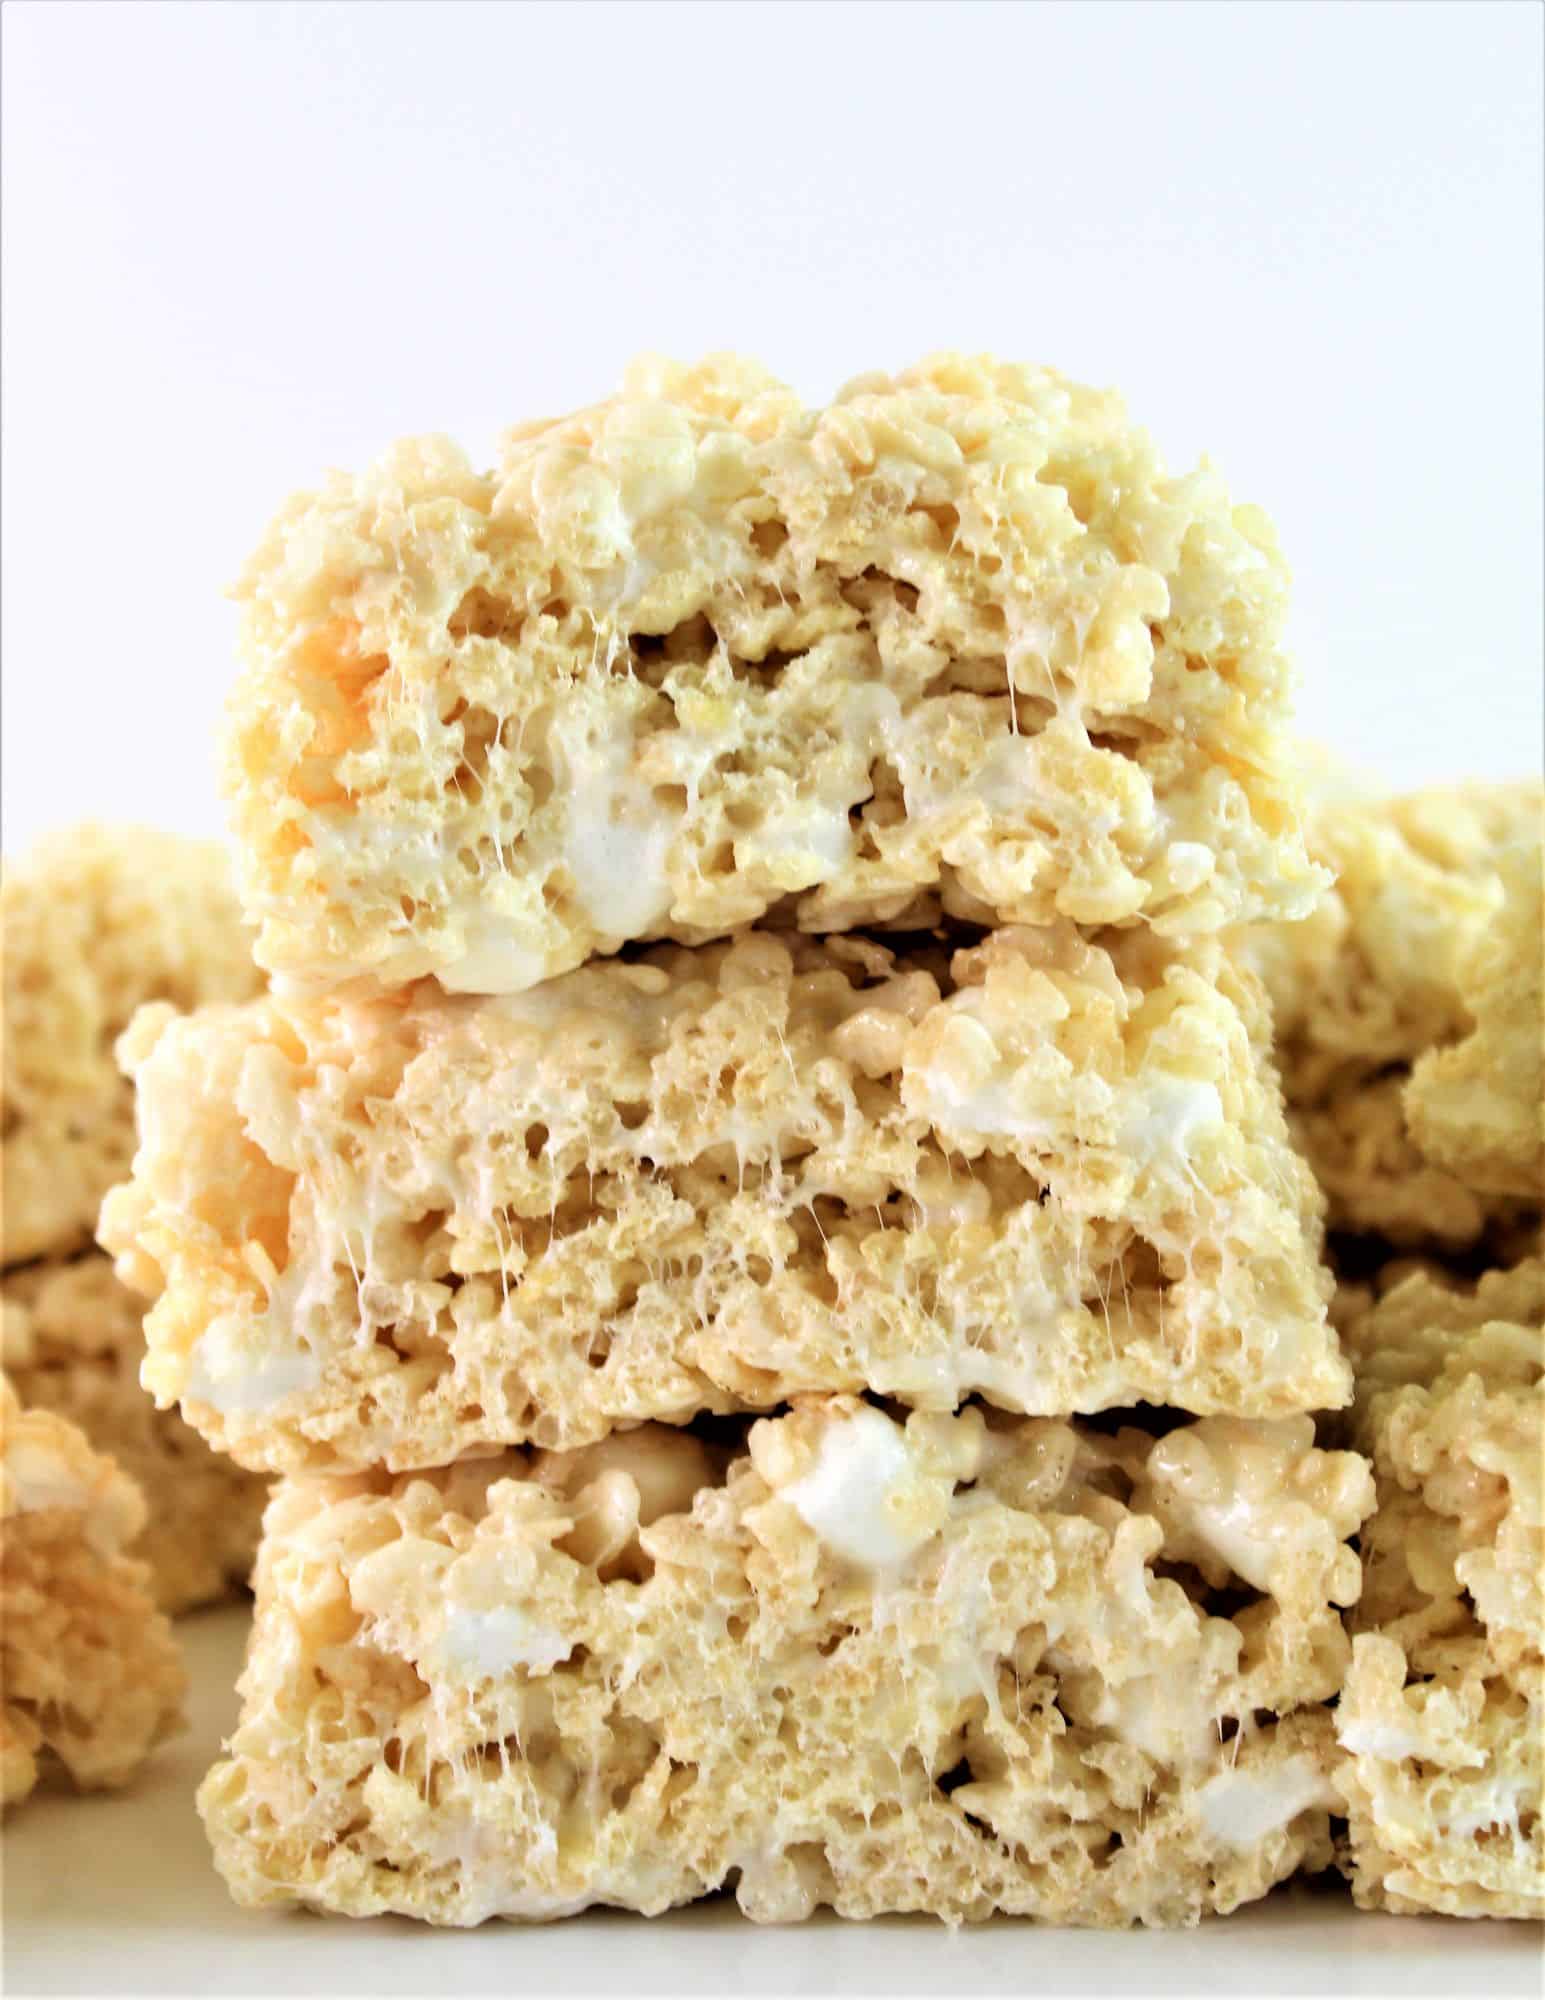 Rice Krispie Treats Recipe (The Most EPIC!) - Brown Eyed Baker